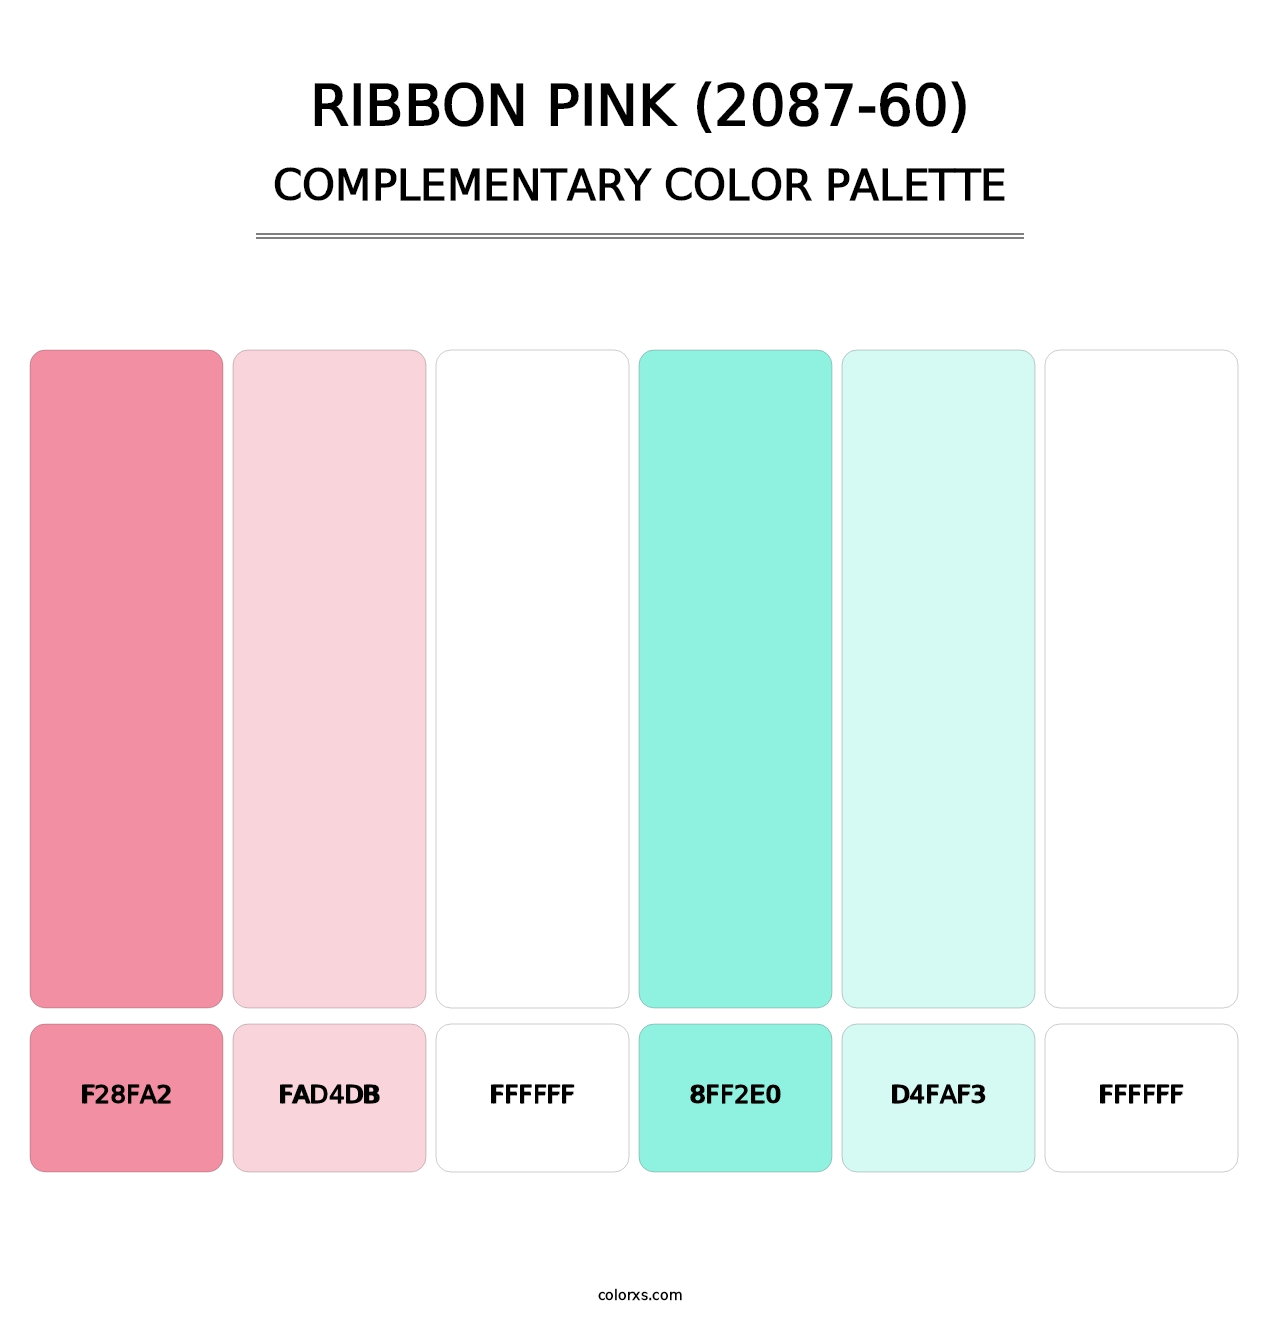 Ribbon Pink (2087-60) - Complementary Color Palette